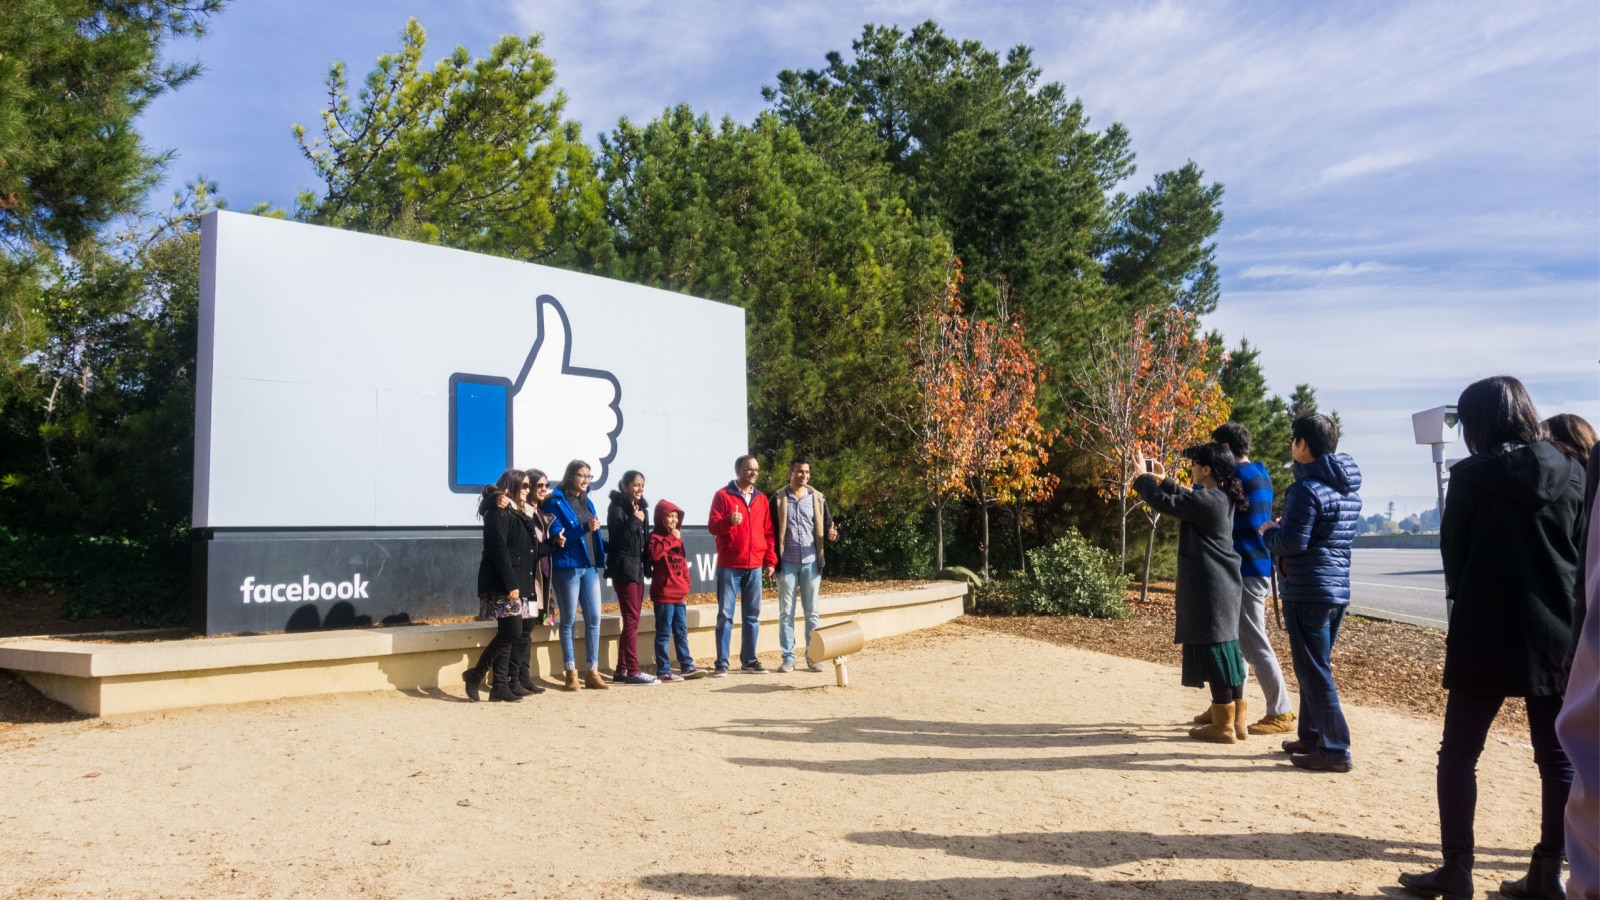 December 27, 2017 Menlo Park / CA / USA - A group of friends posing in front of the Facebook Like Button sign located at the entrance to the company's main headquarters located in Silicon Valley